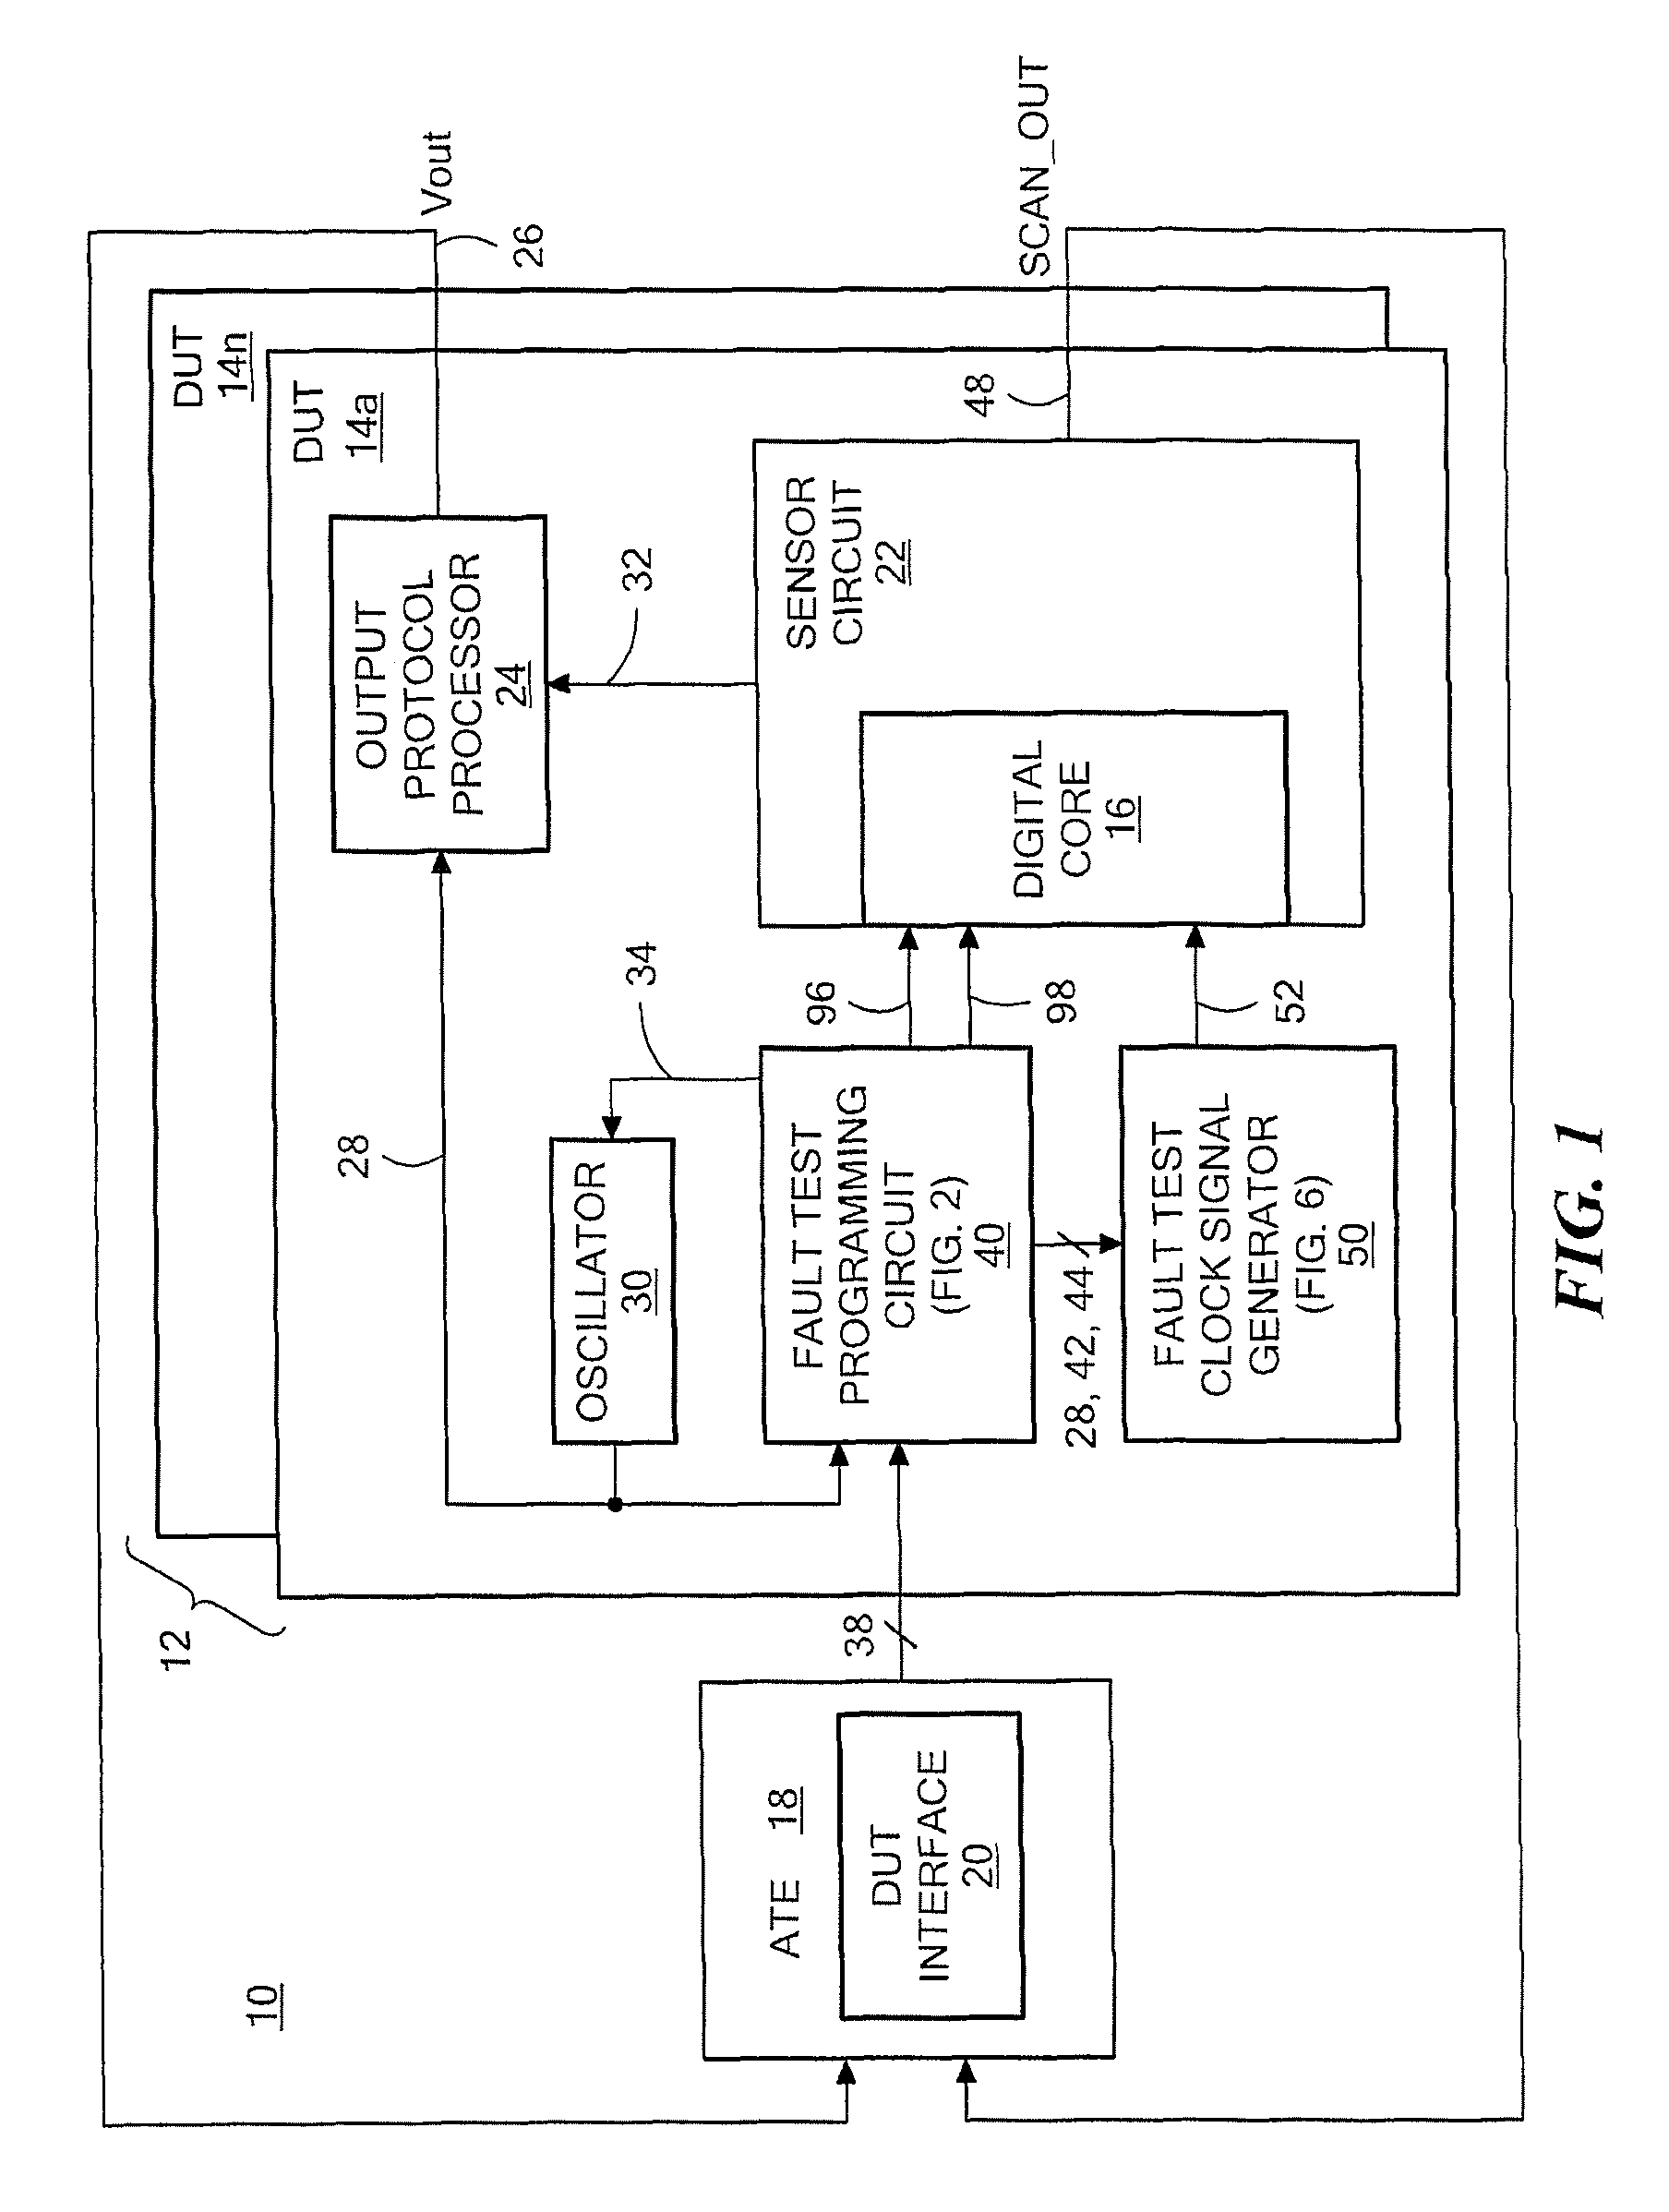 Circuits and methods for fault testing